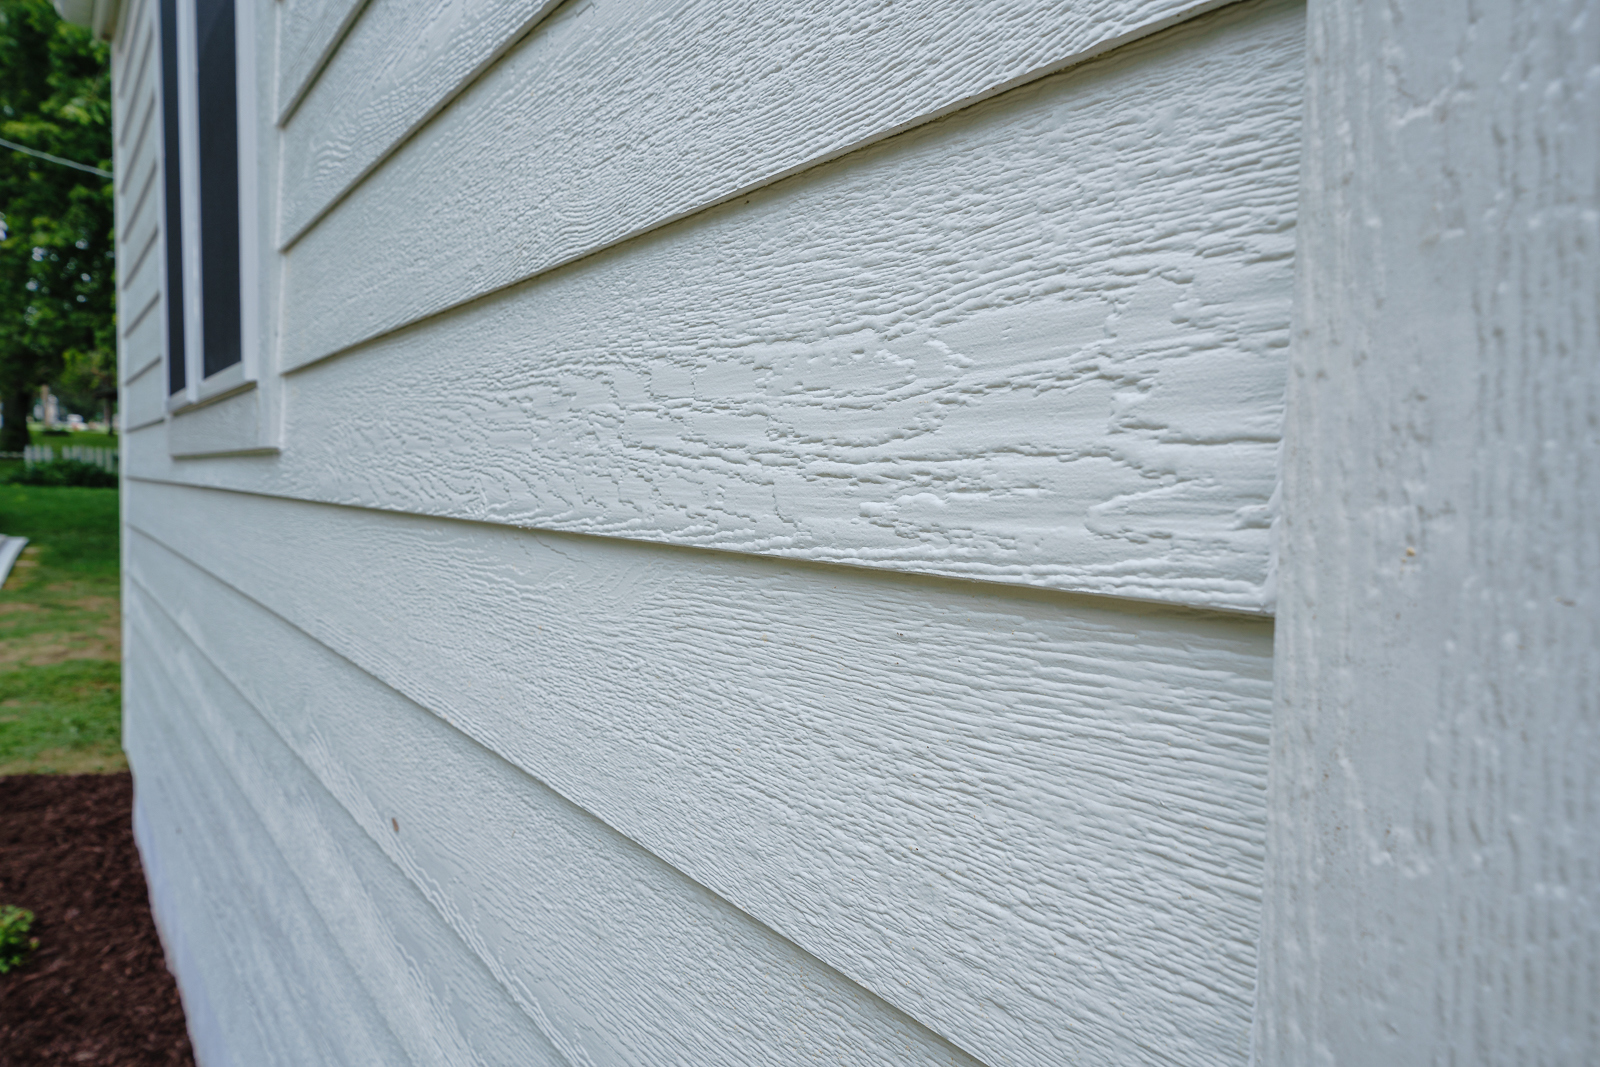 LP<sup>®</sup> SmartSide<sup>®</sup> Trim & Siding is one of the most durable siding materials available, due to the LP<sup>®</sup> SmartGuard<sup>®</sup> manufacturing process and its four components of protection.